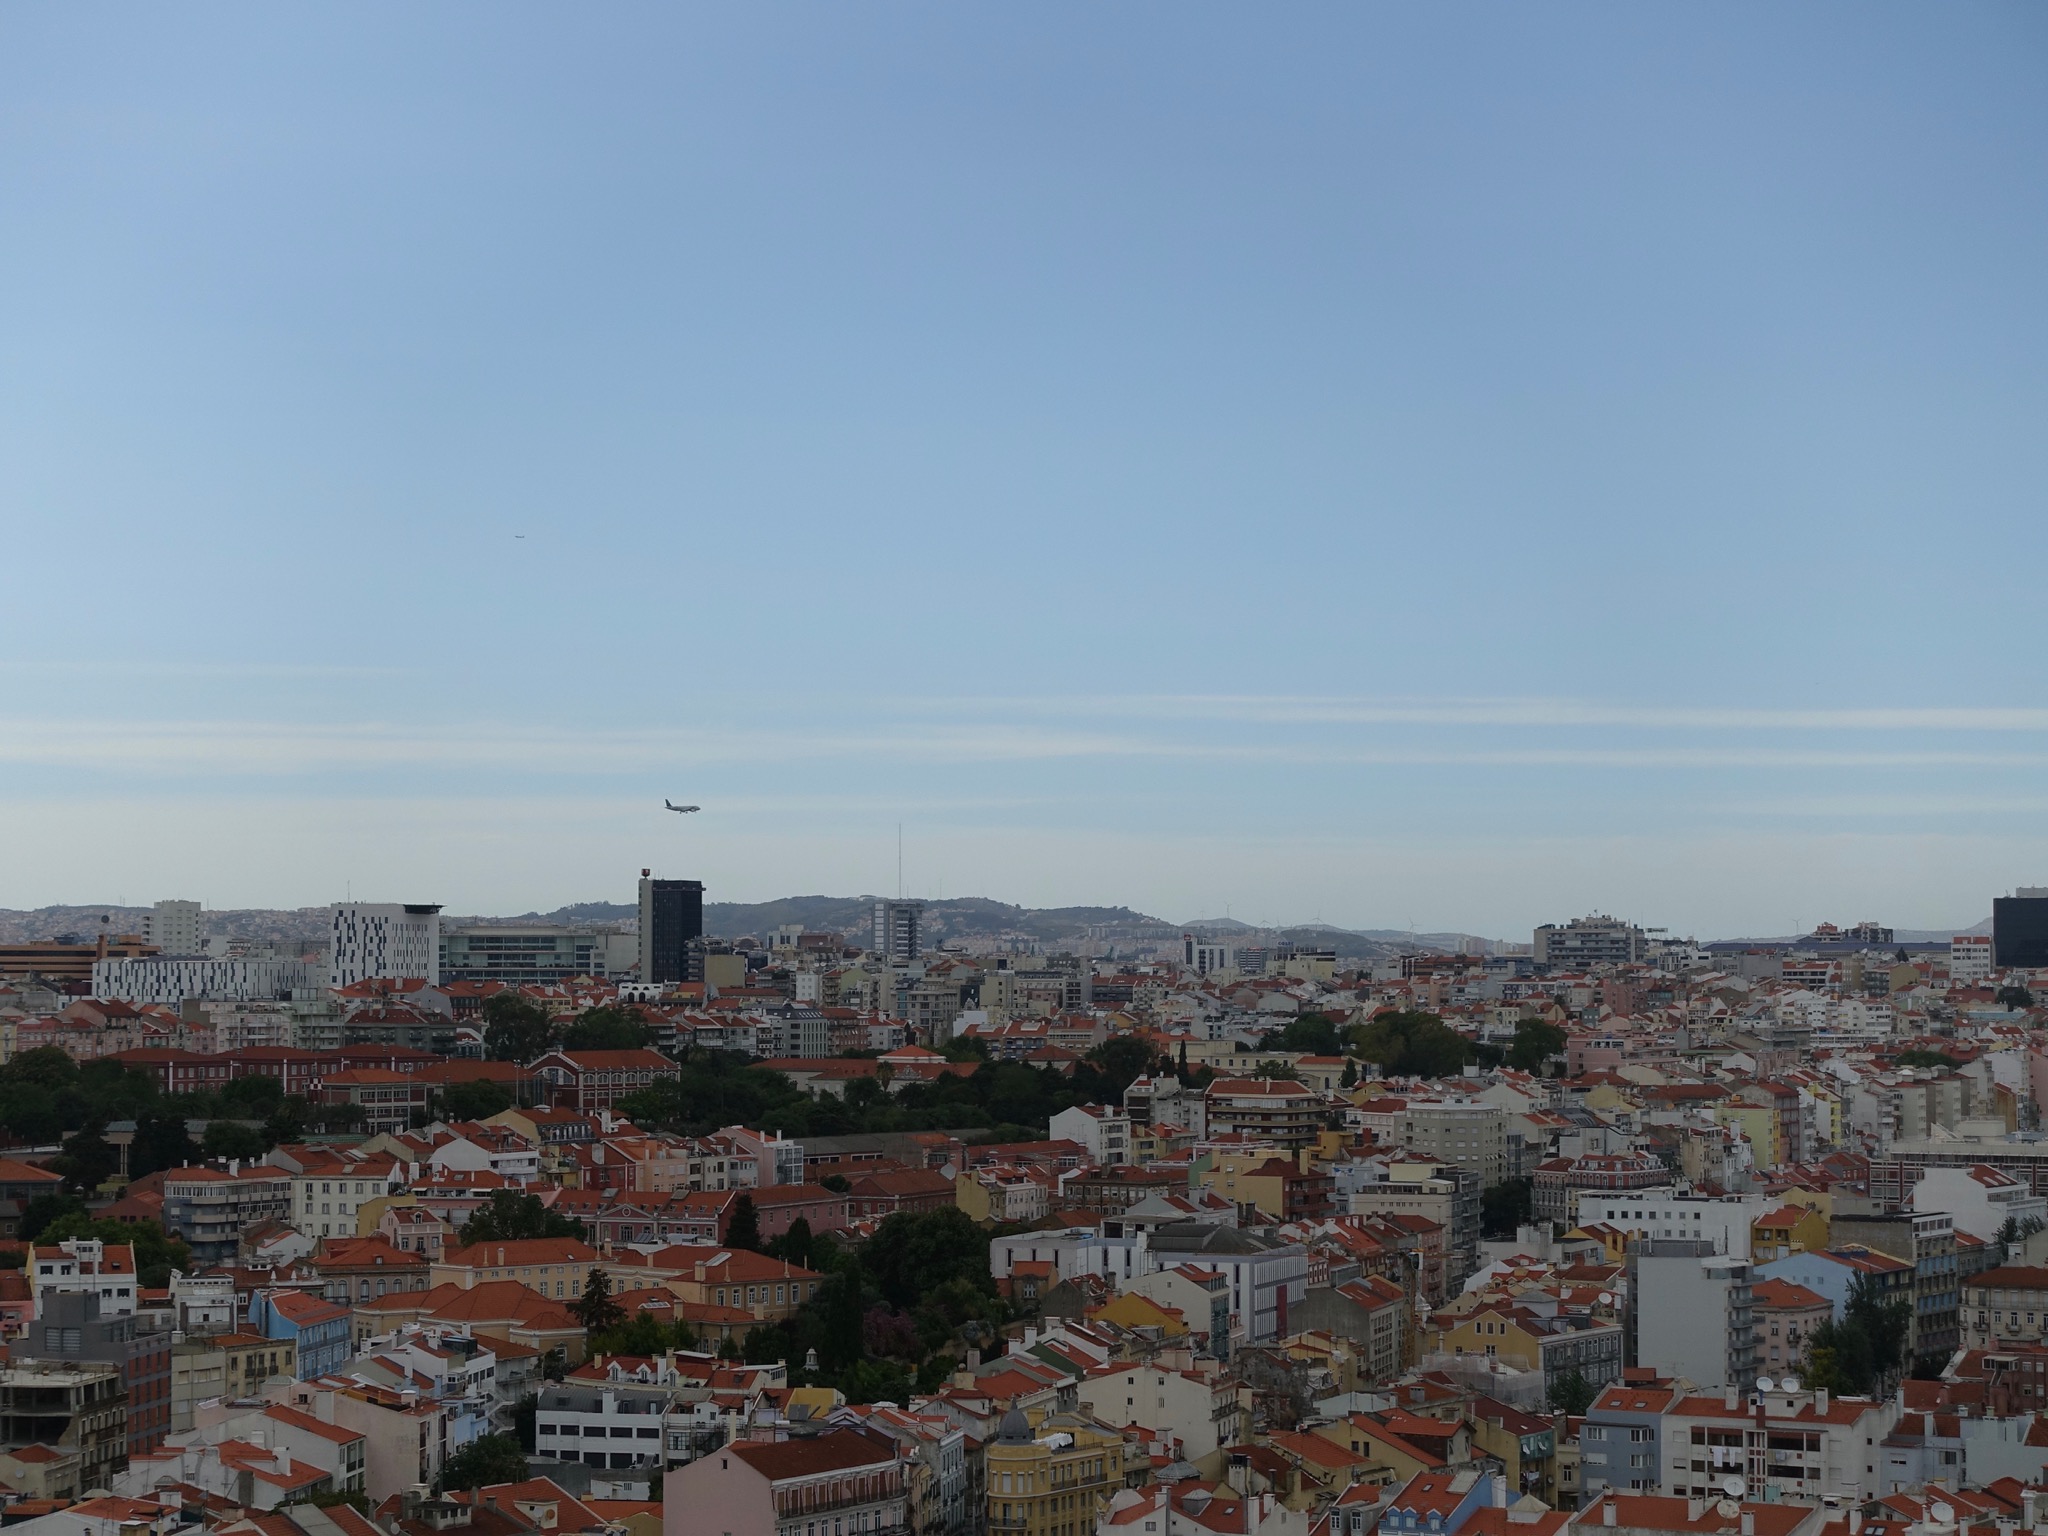 Photo 11 of 86 from the album Highlights Lisbon 2015.